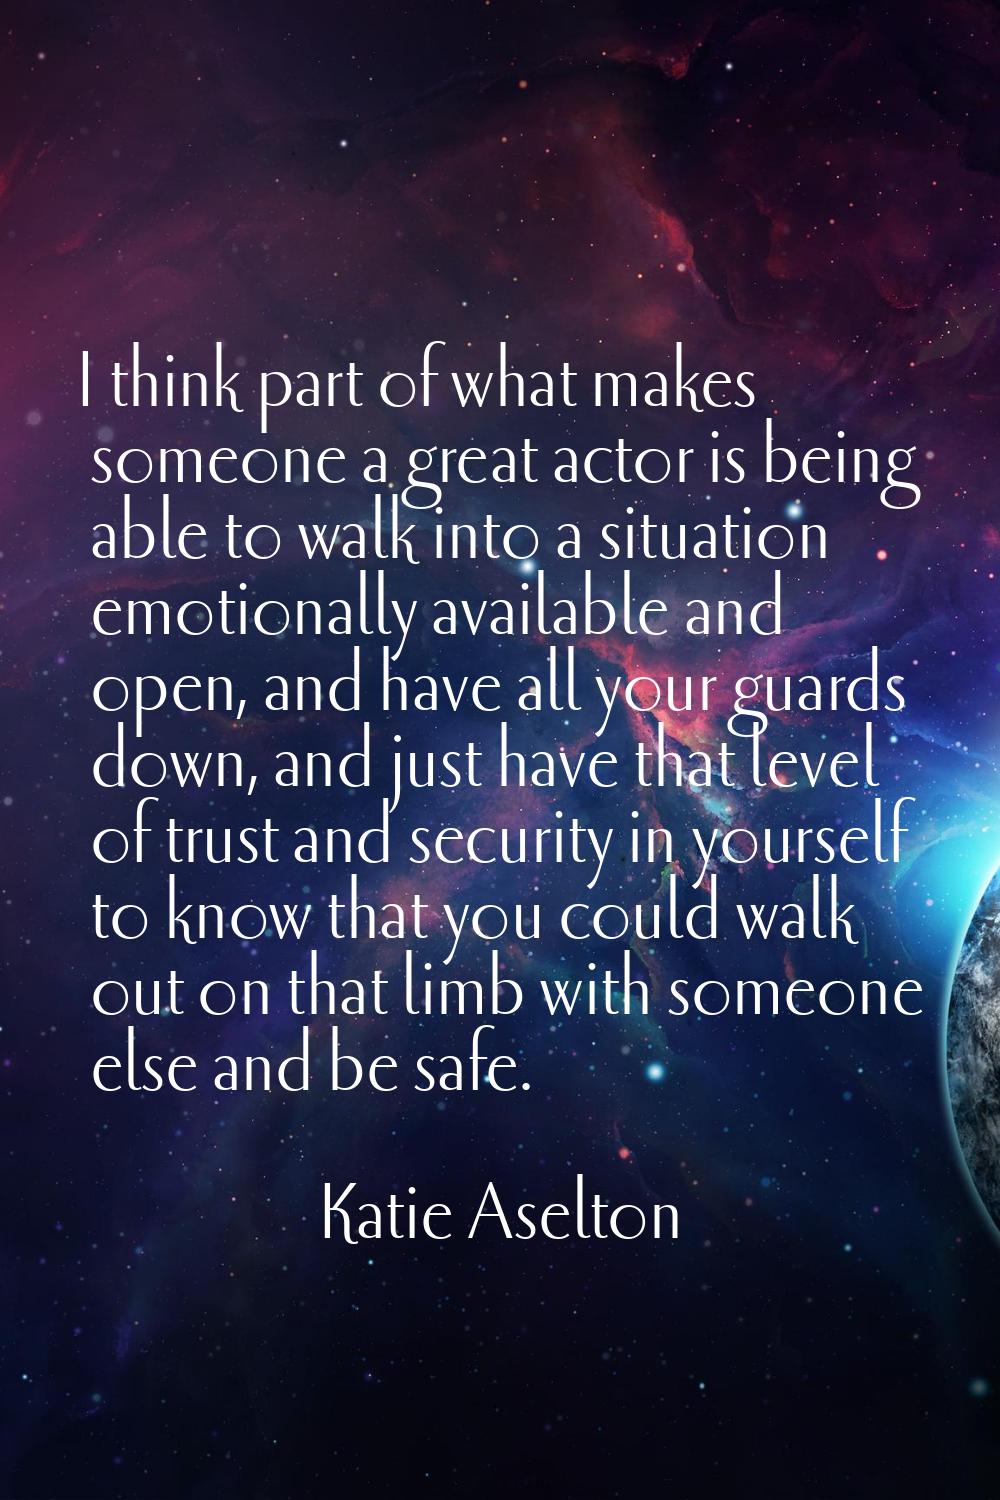 I think part of what makes someone a great actor is being able to walk into a situation emotionally